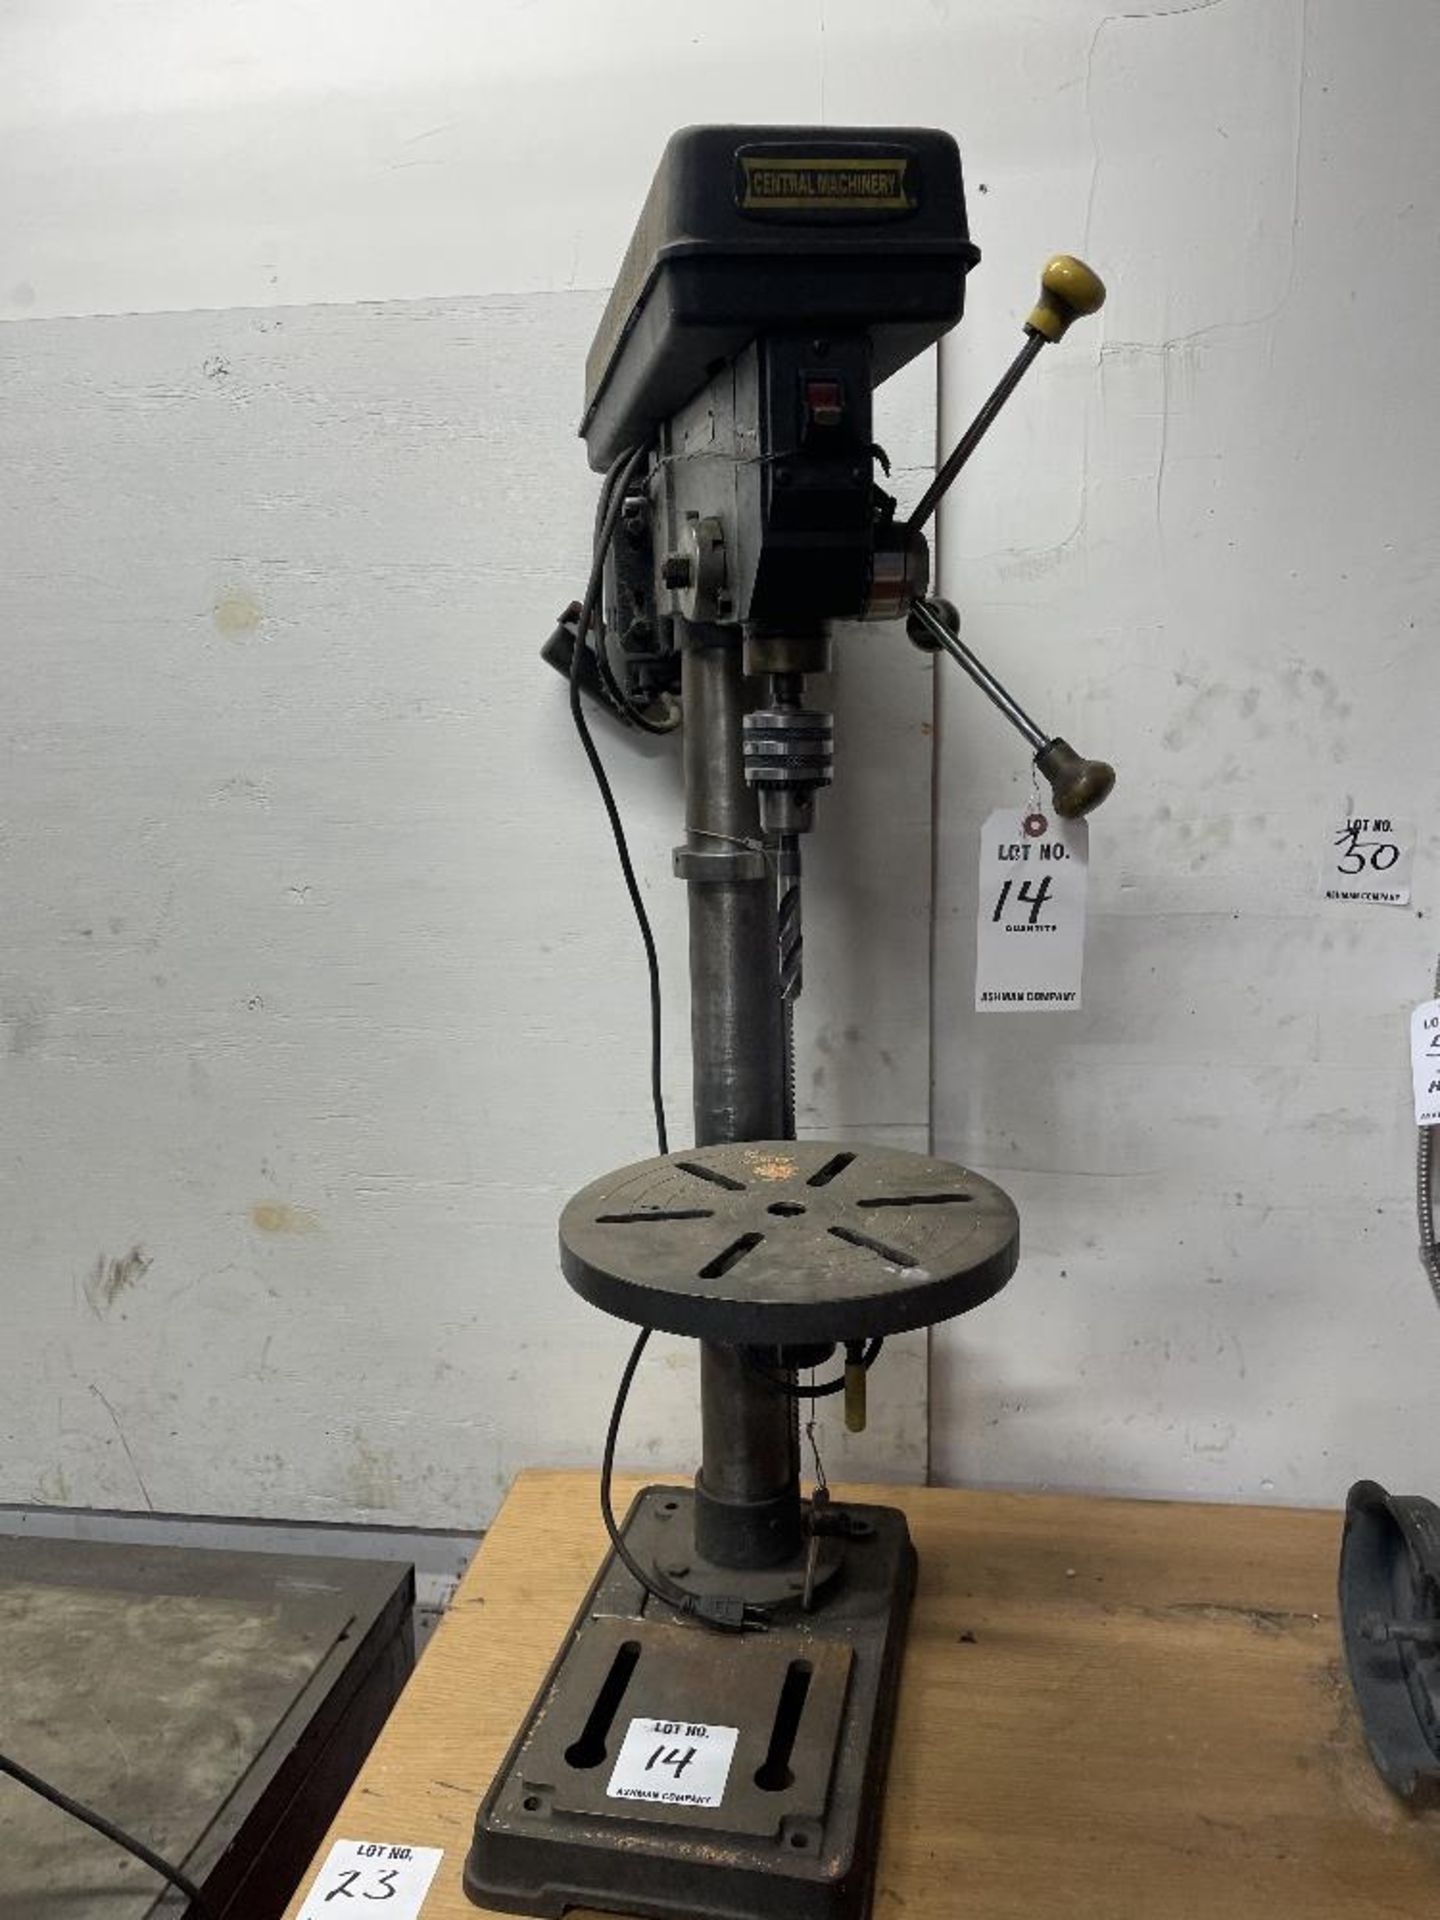 CENTRAL MACHINERY 13” DRILL PRESS